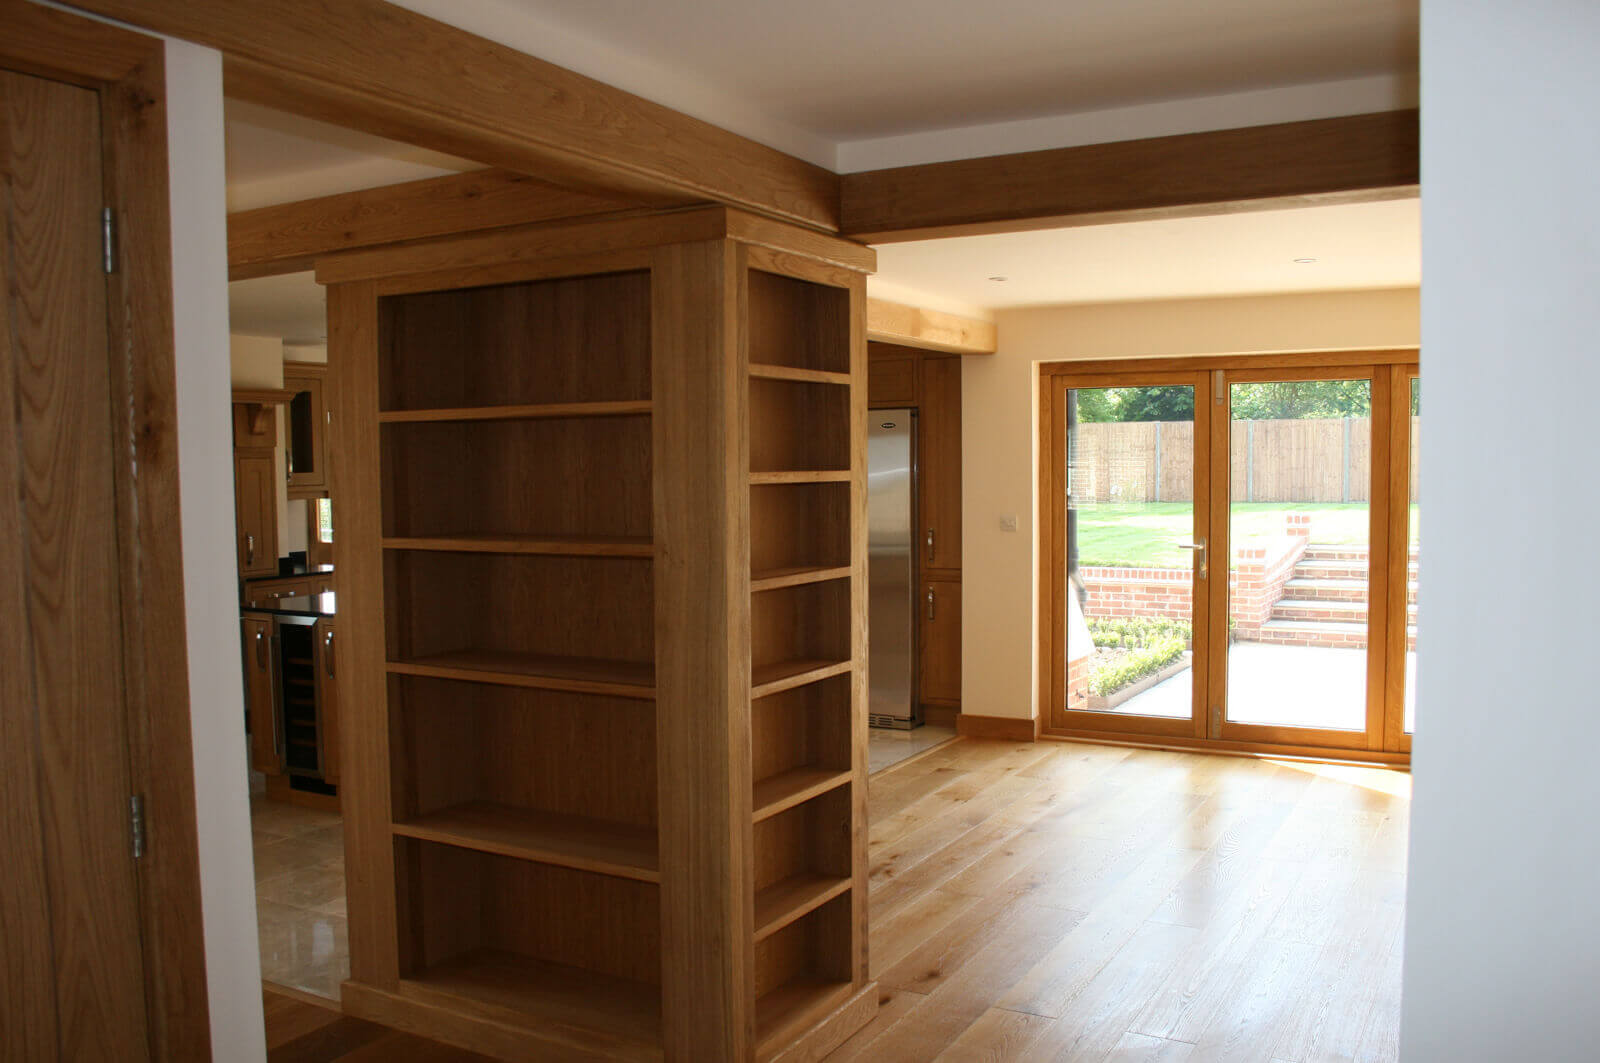 Close up of built-in shelving unit upon which open plan living area and kitchen is centered.